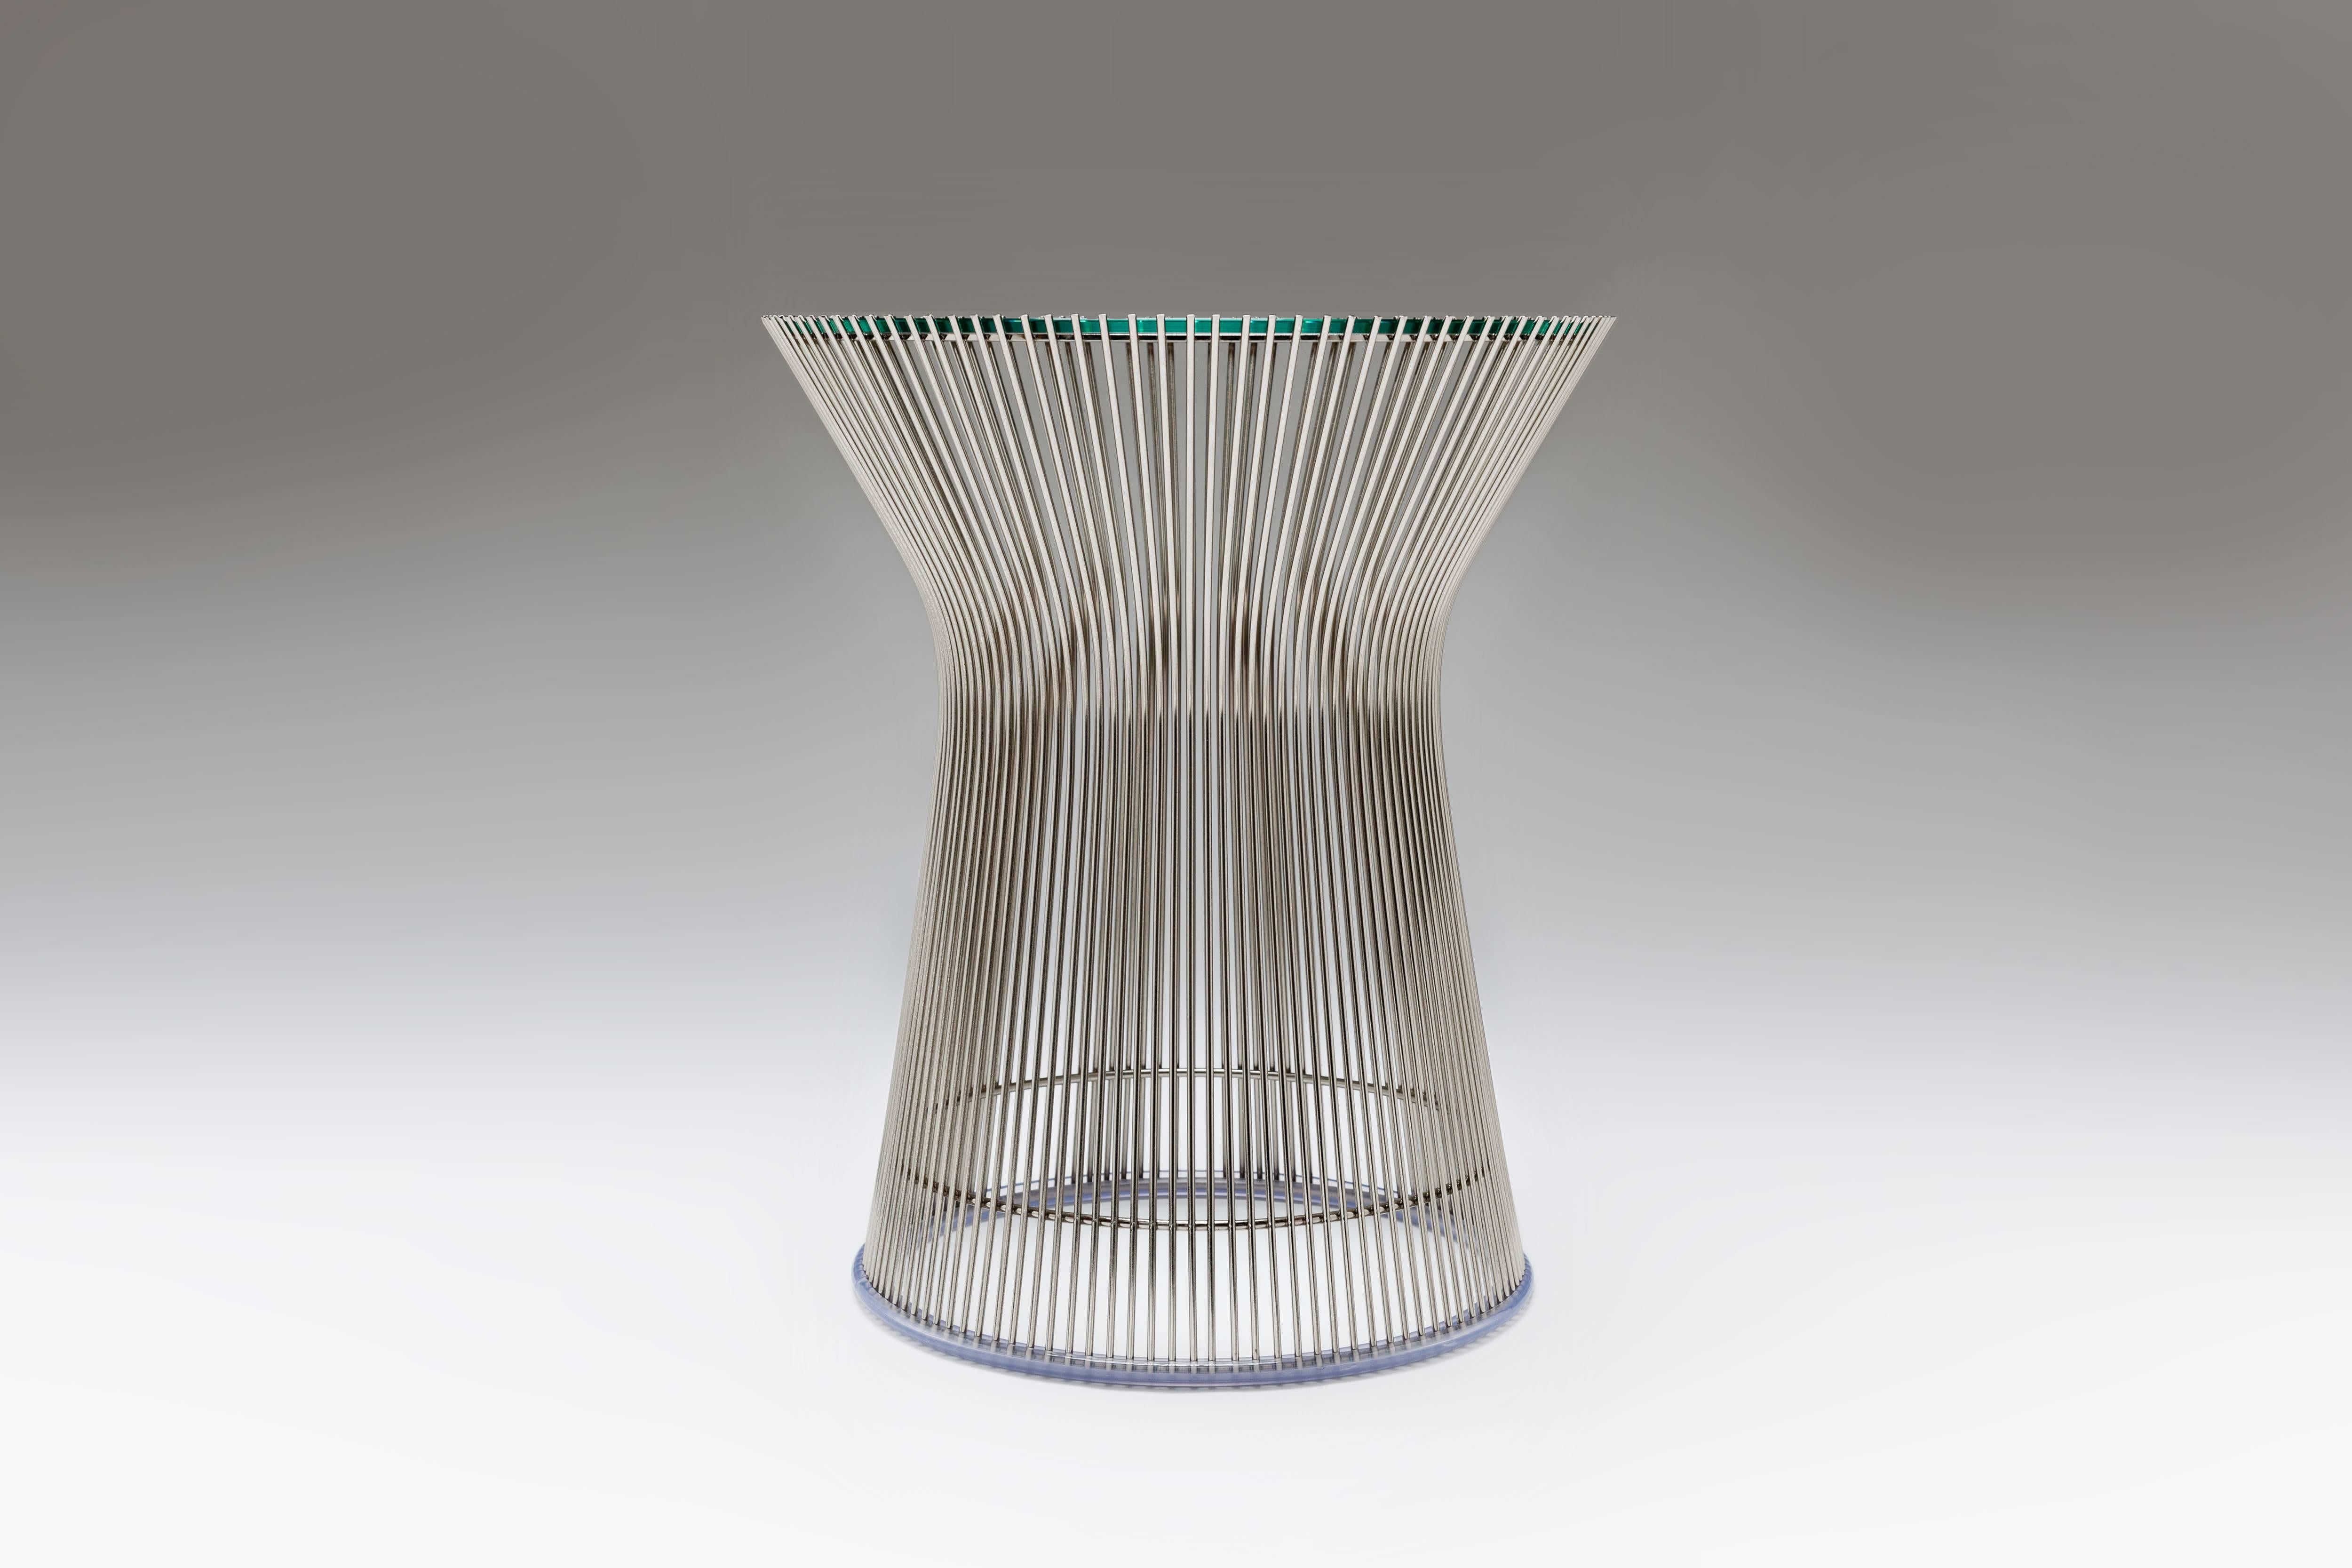 Nikkel-plated steel wire rods side table by Warren Platner for Knoll International with transparant glass tabletop. Part of the wire series designed by Warren Platner in 1966. 



